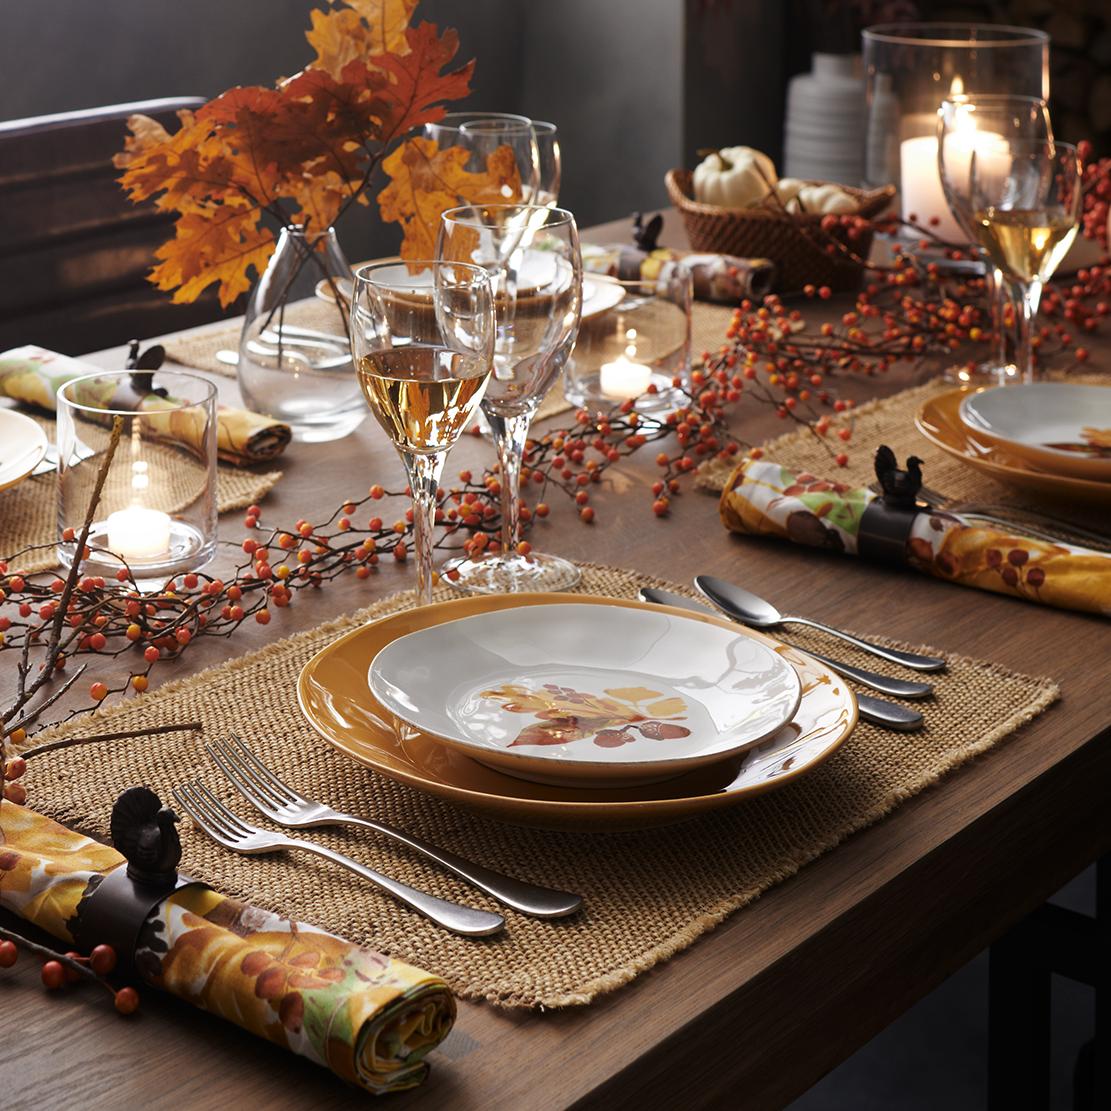 Holiday Decor, Dinnerware and Serveware | Crate and Barrel